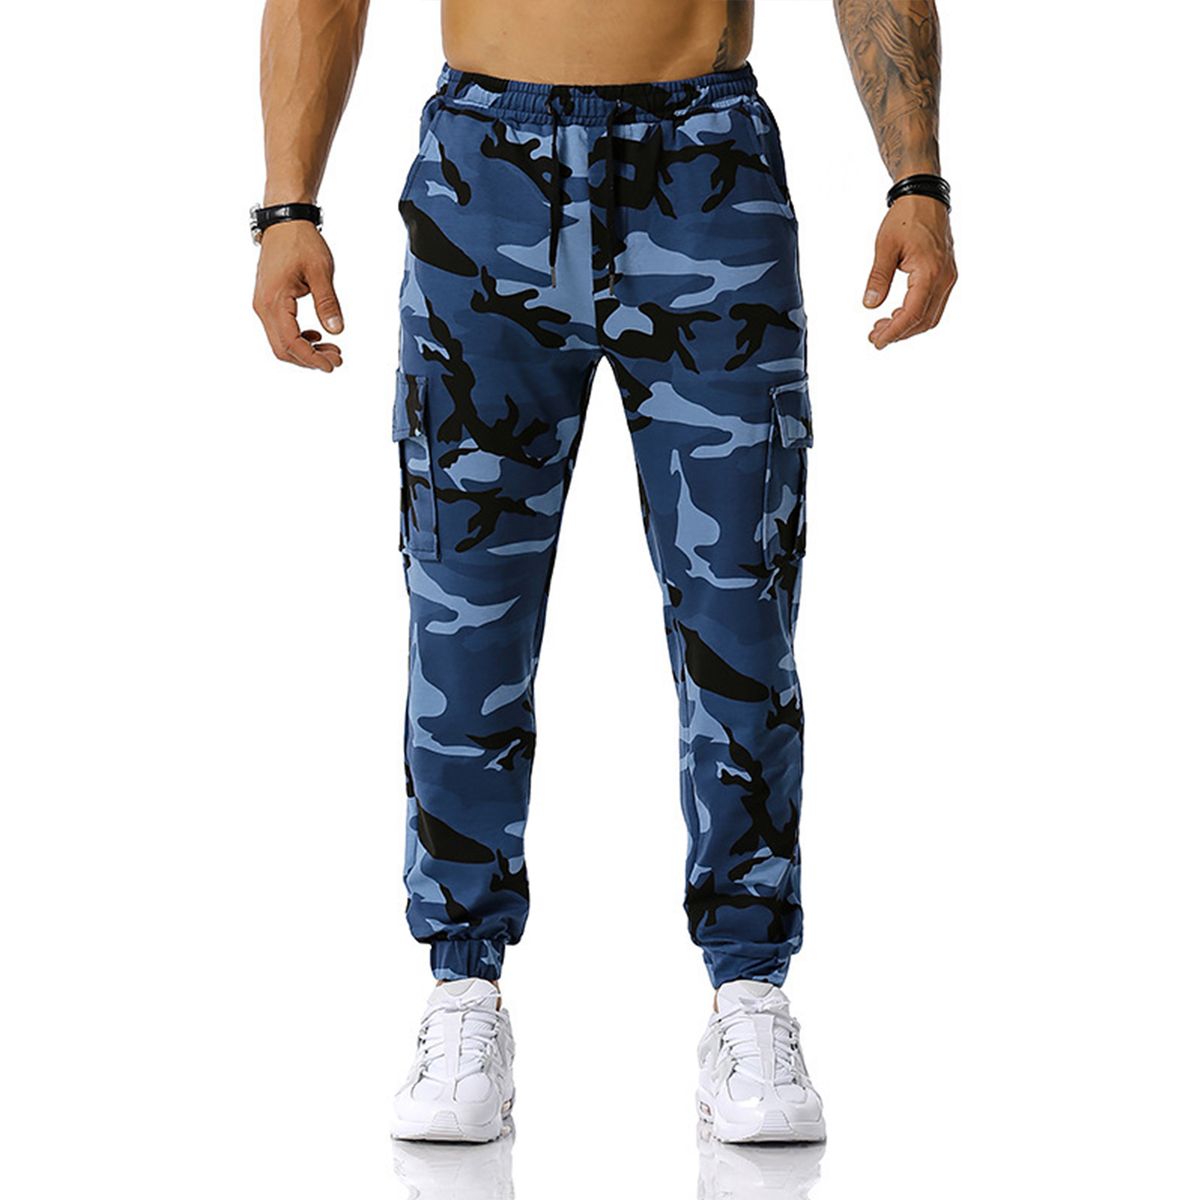 Mens Camouflage Jogging Pants Long Joggers with Pockets Running ...